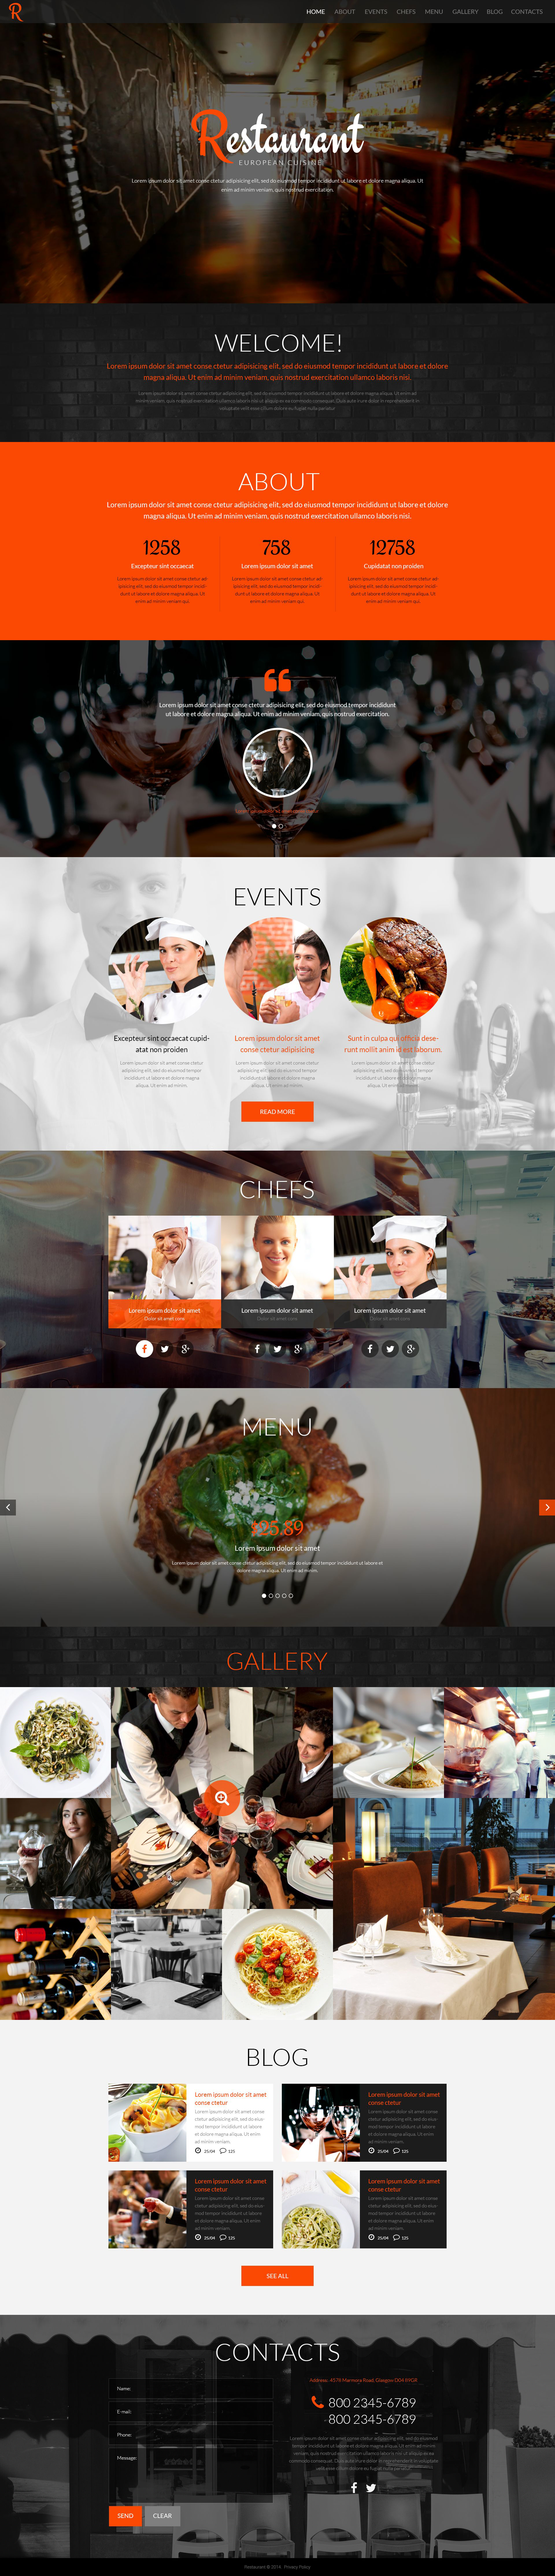 Flavory - Restaurant and Cafe WordPress Theme